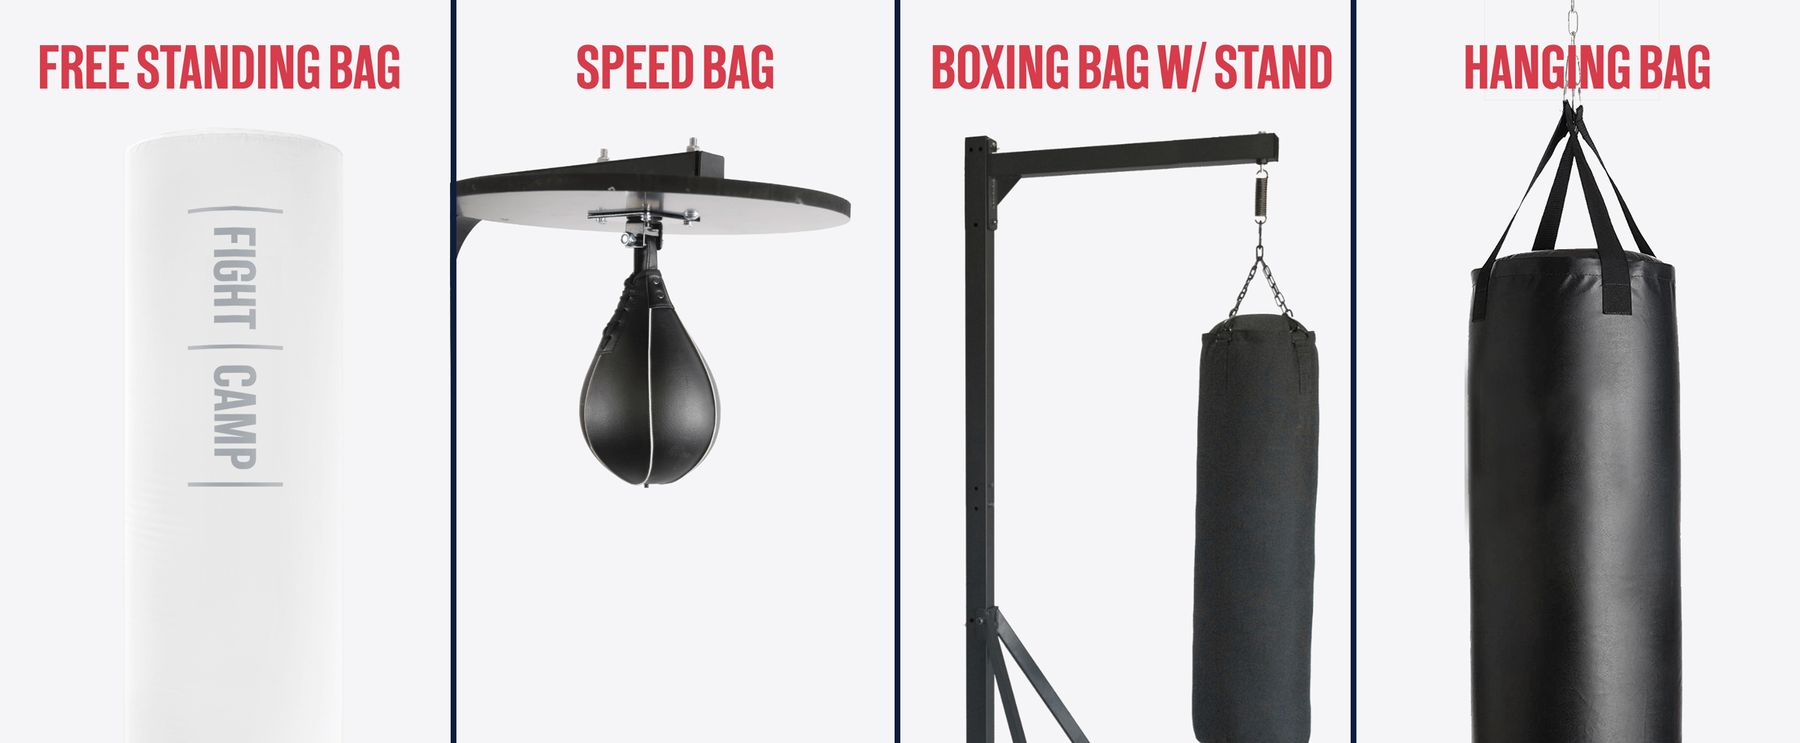 Sudden descent straight ahead Large quantity Types of Punching Bags & How to Choose | FightCamp